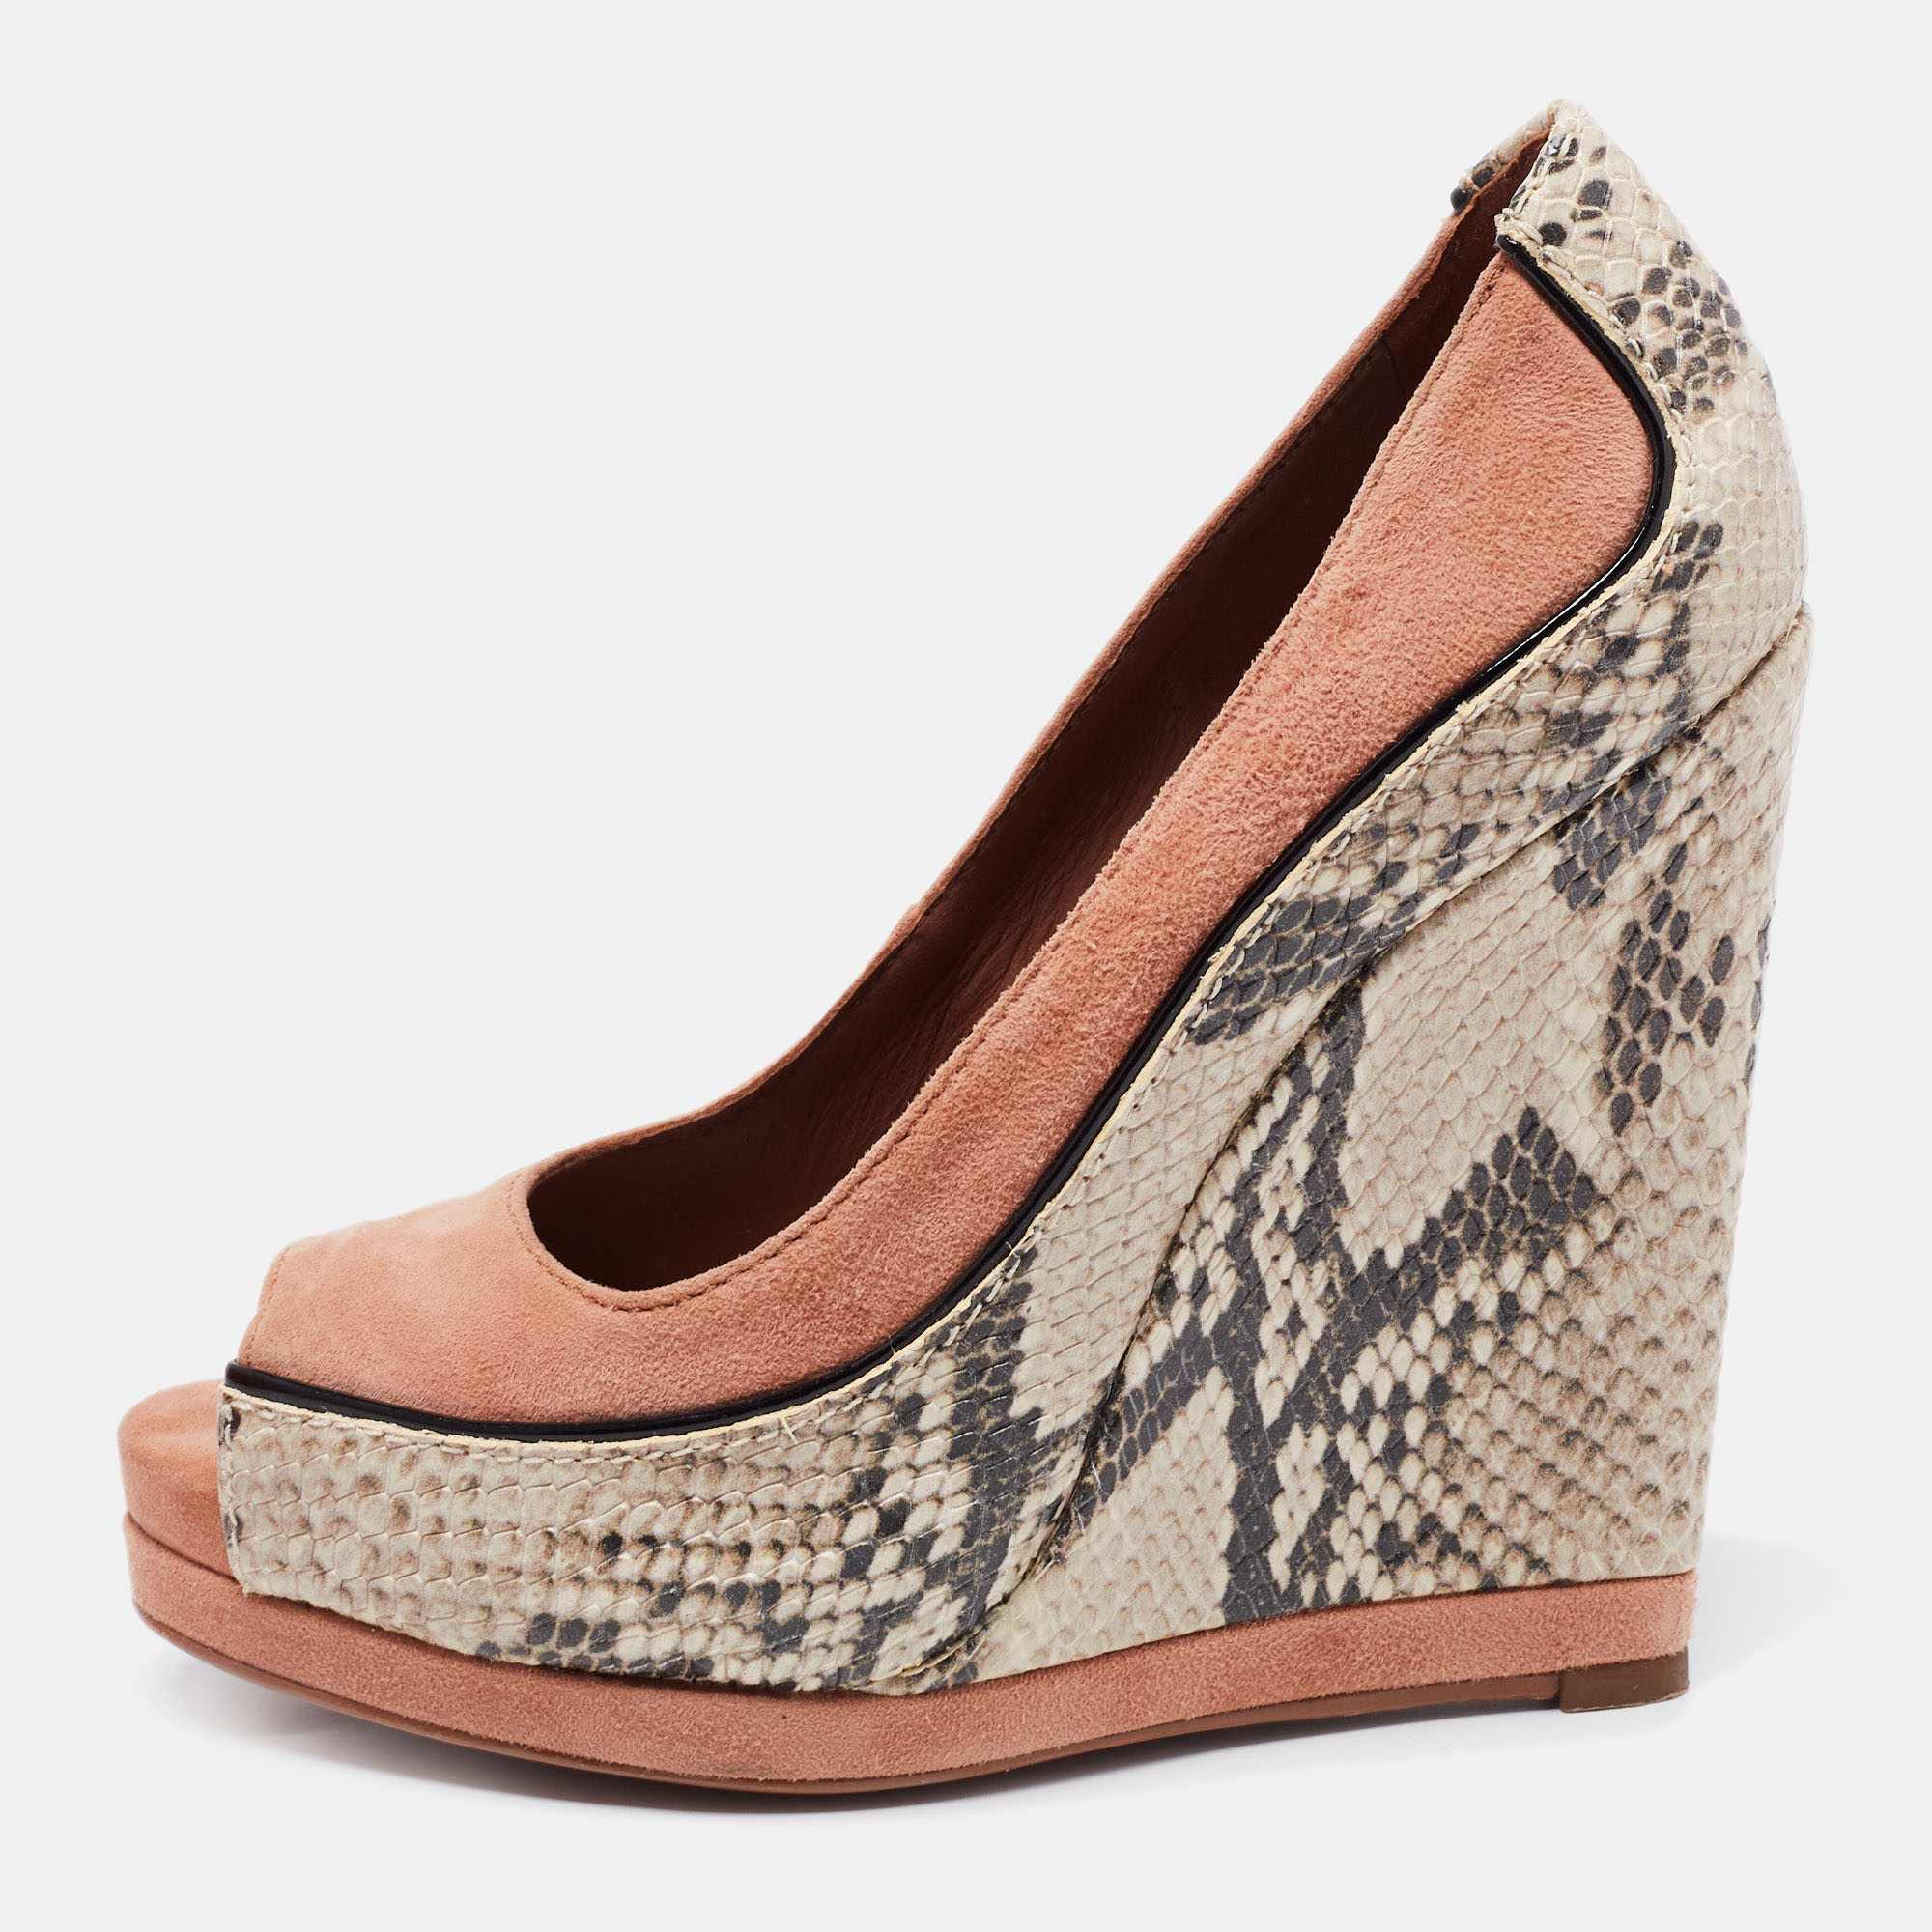 

Tory Burch Beige Suede And Python Embossed Leather Sandra Wedge Platform Pumps Size